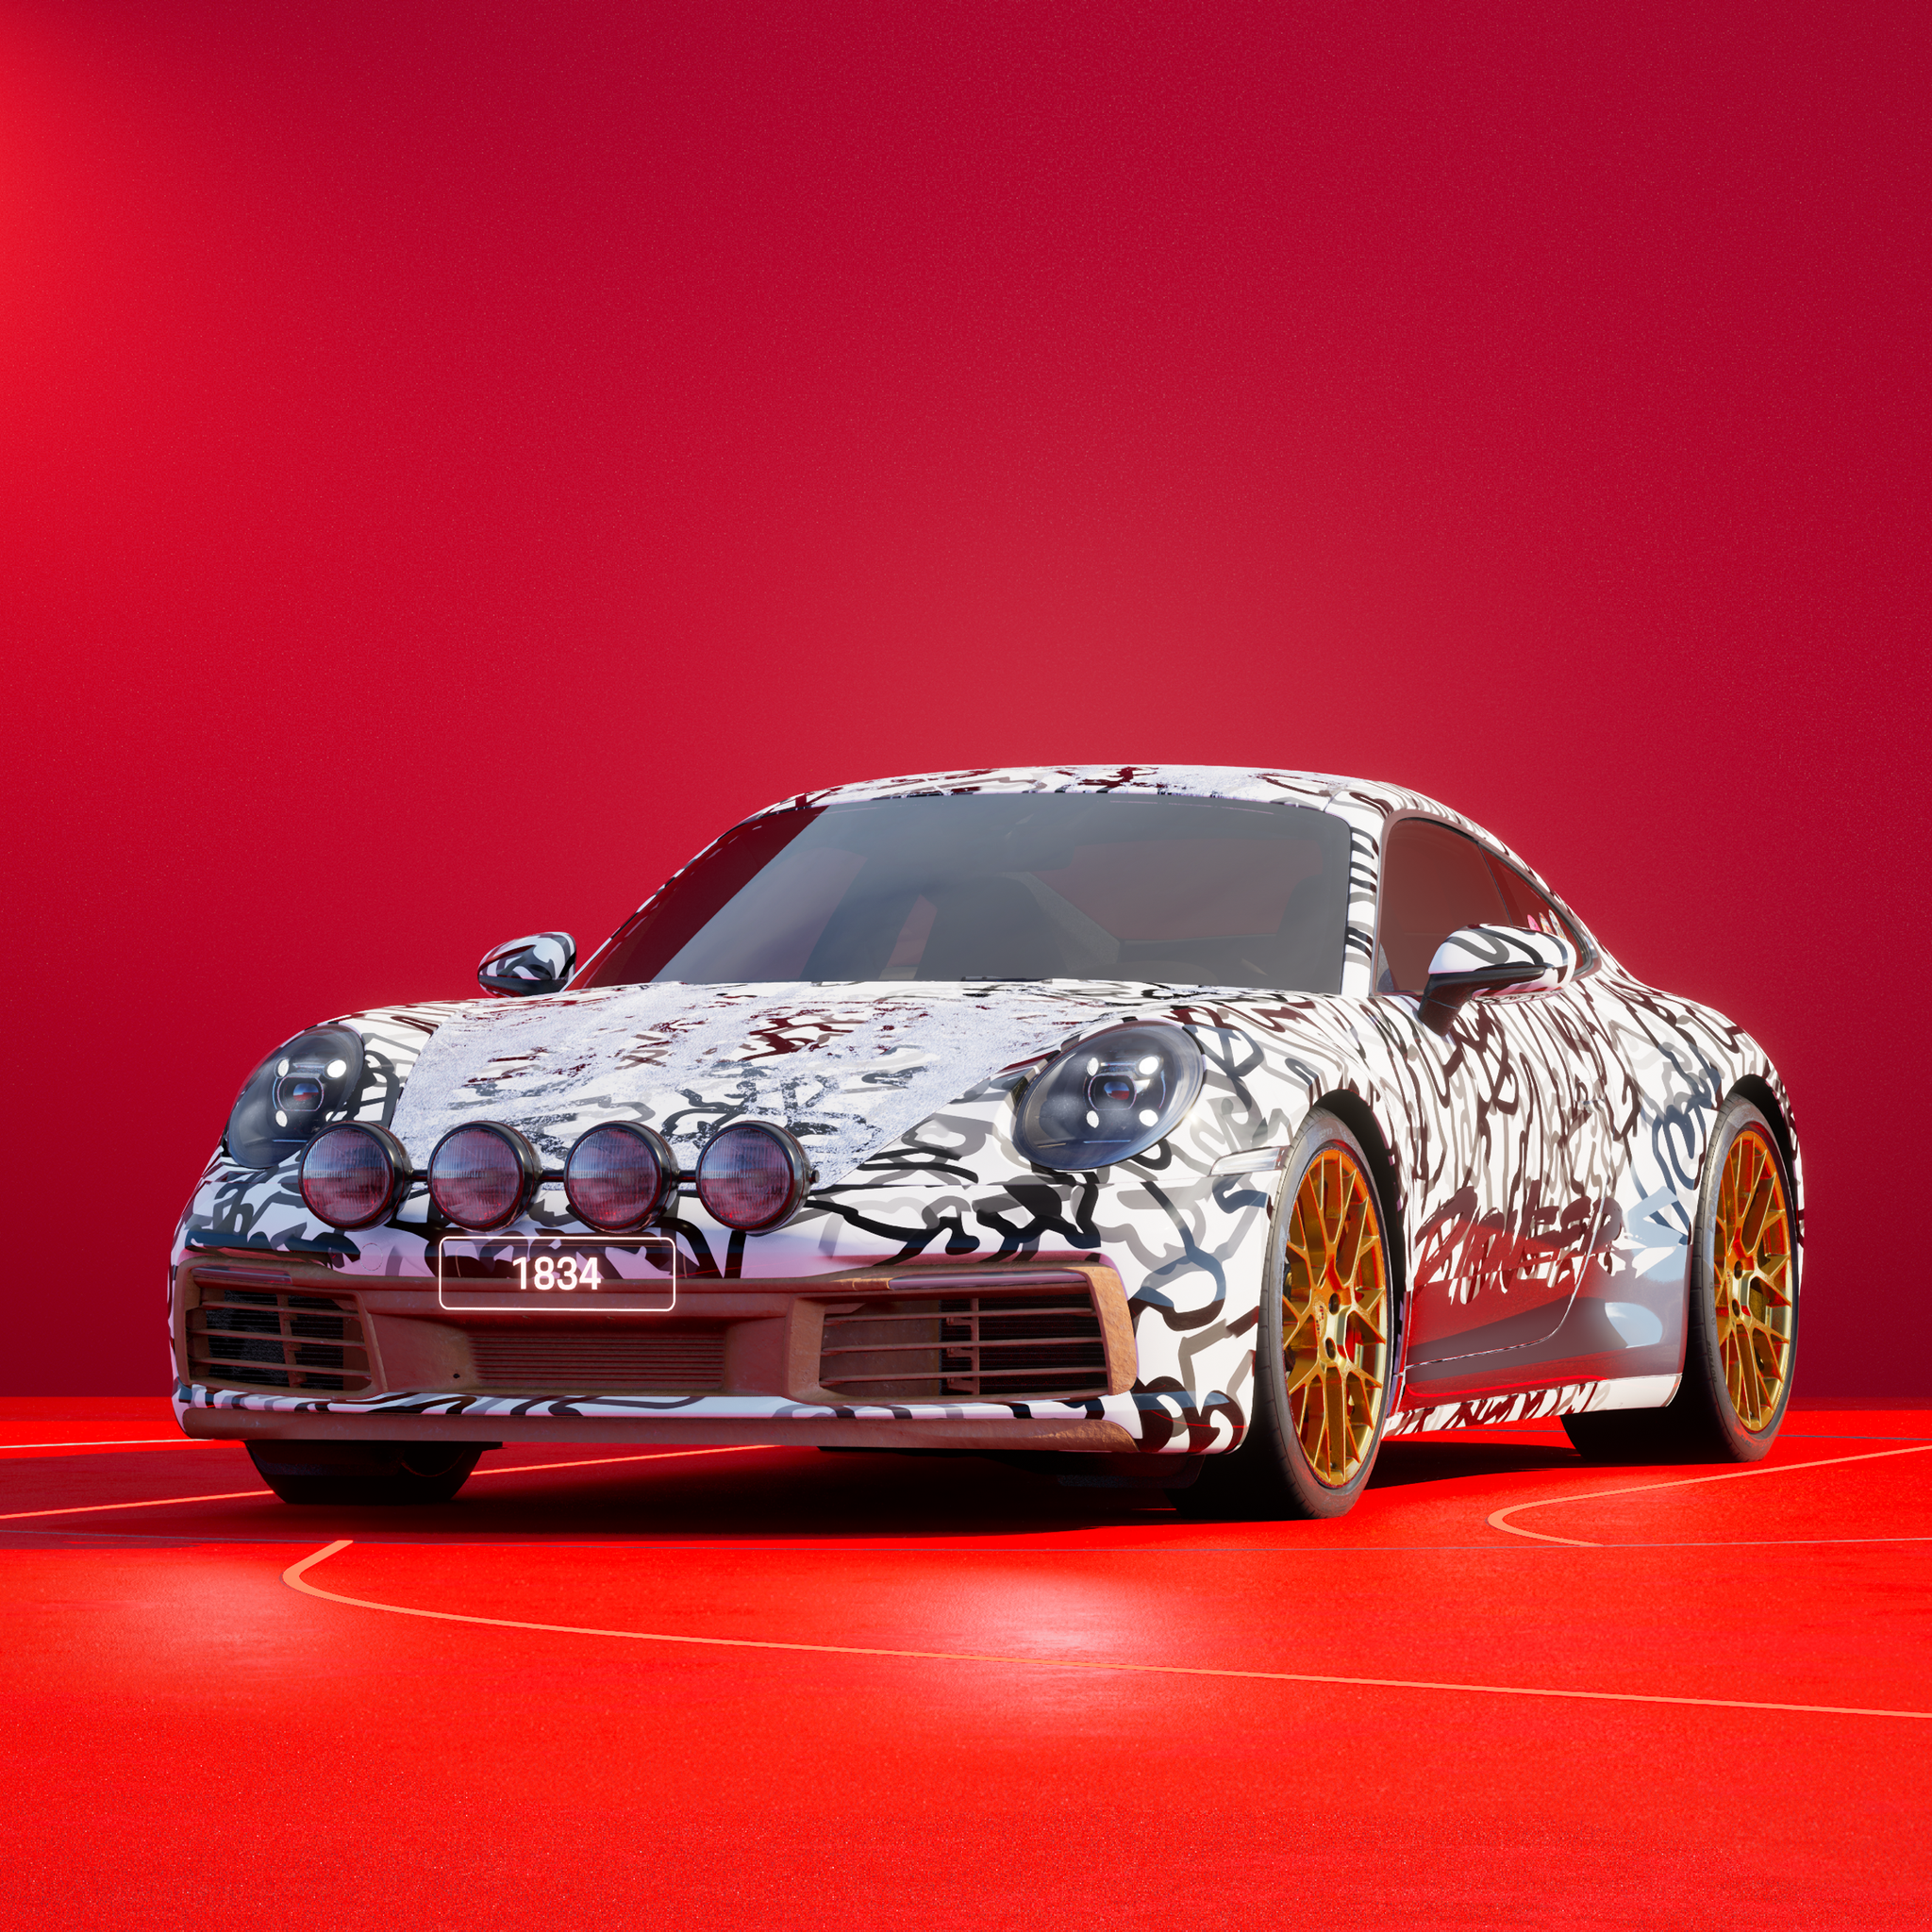 The PORSCHΞ 911 1834 image in phase